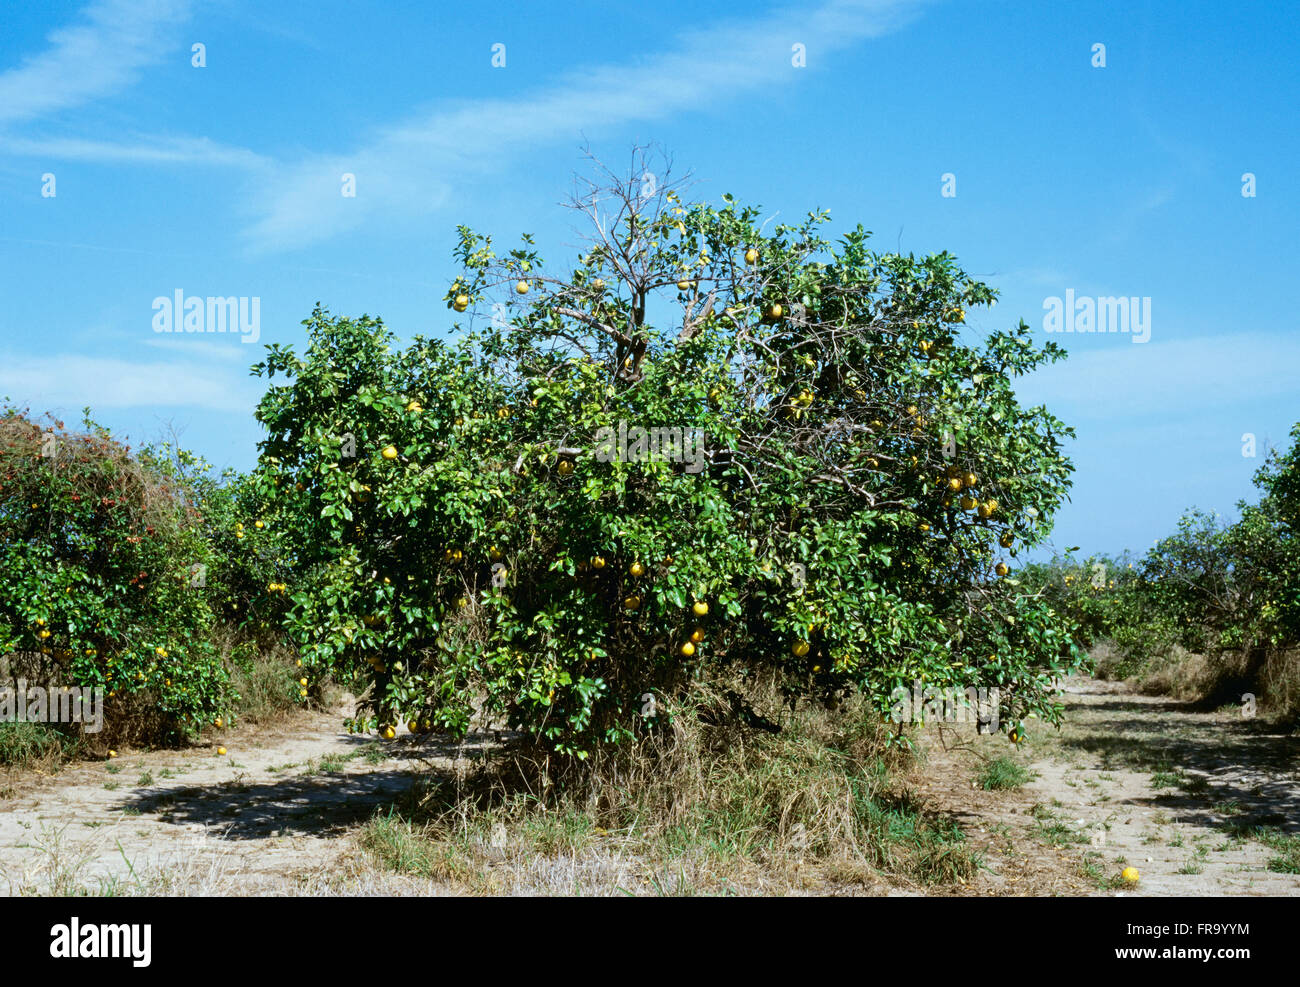 Agriculture - A grapefruit tree dying from burrowing nematode injury / Florida, USA. Stock Photo